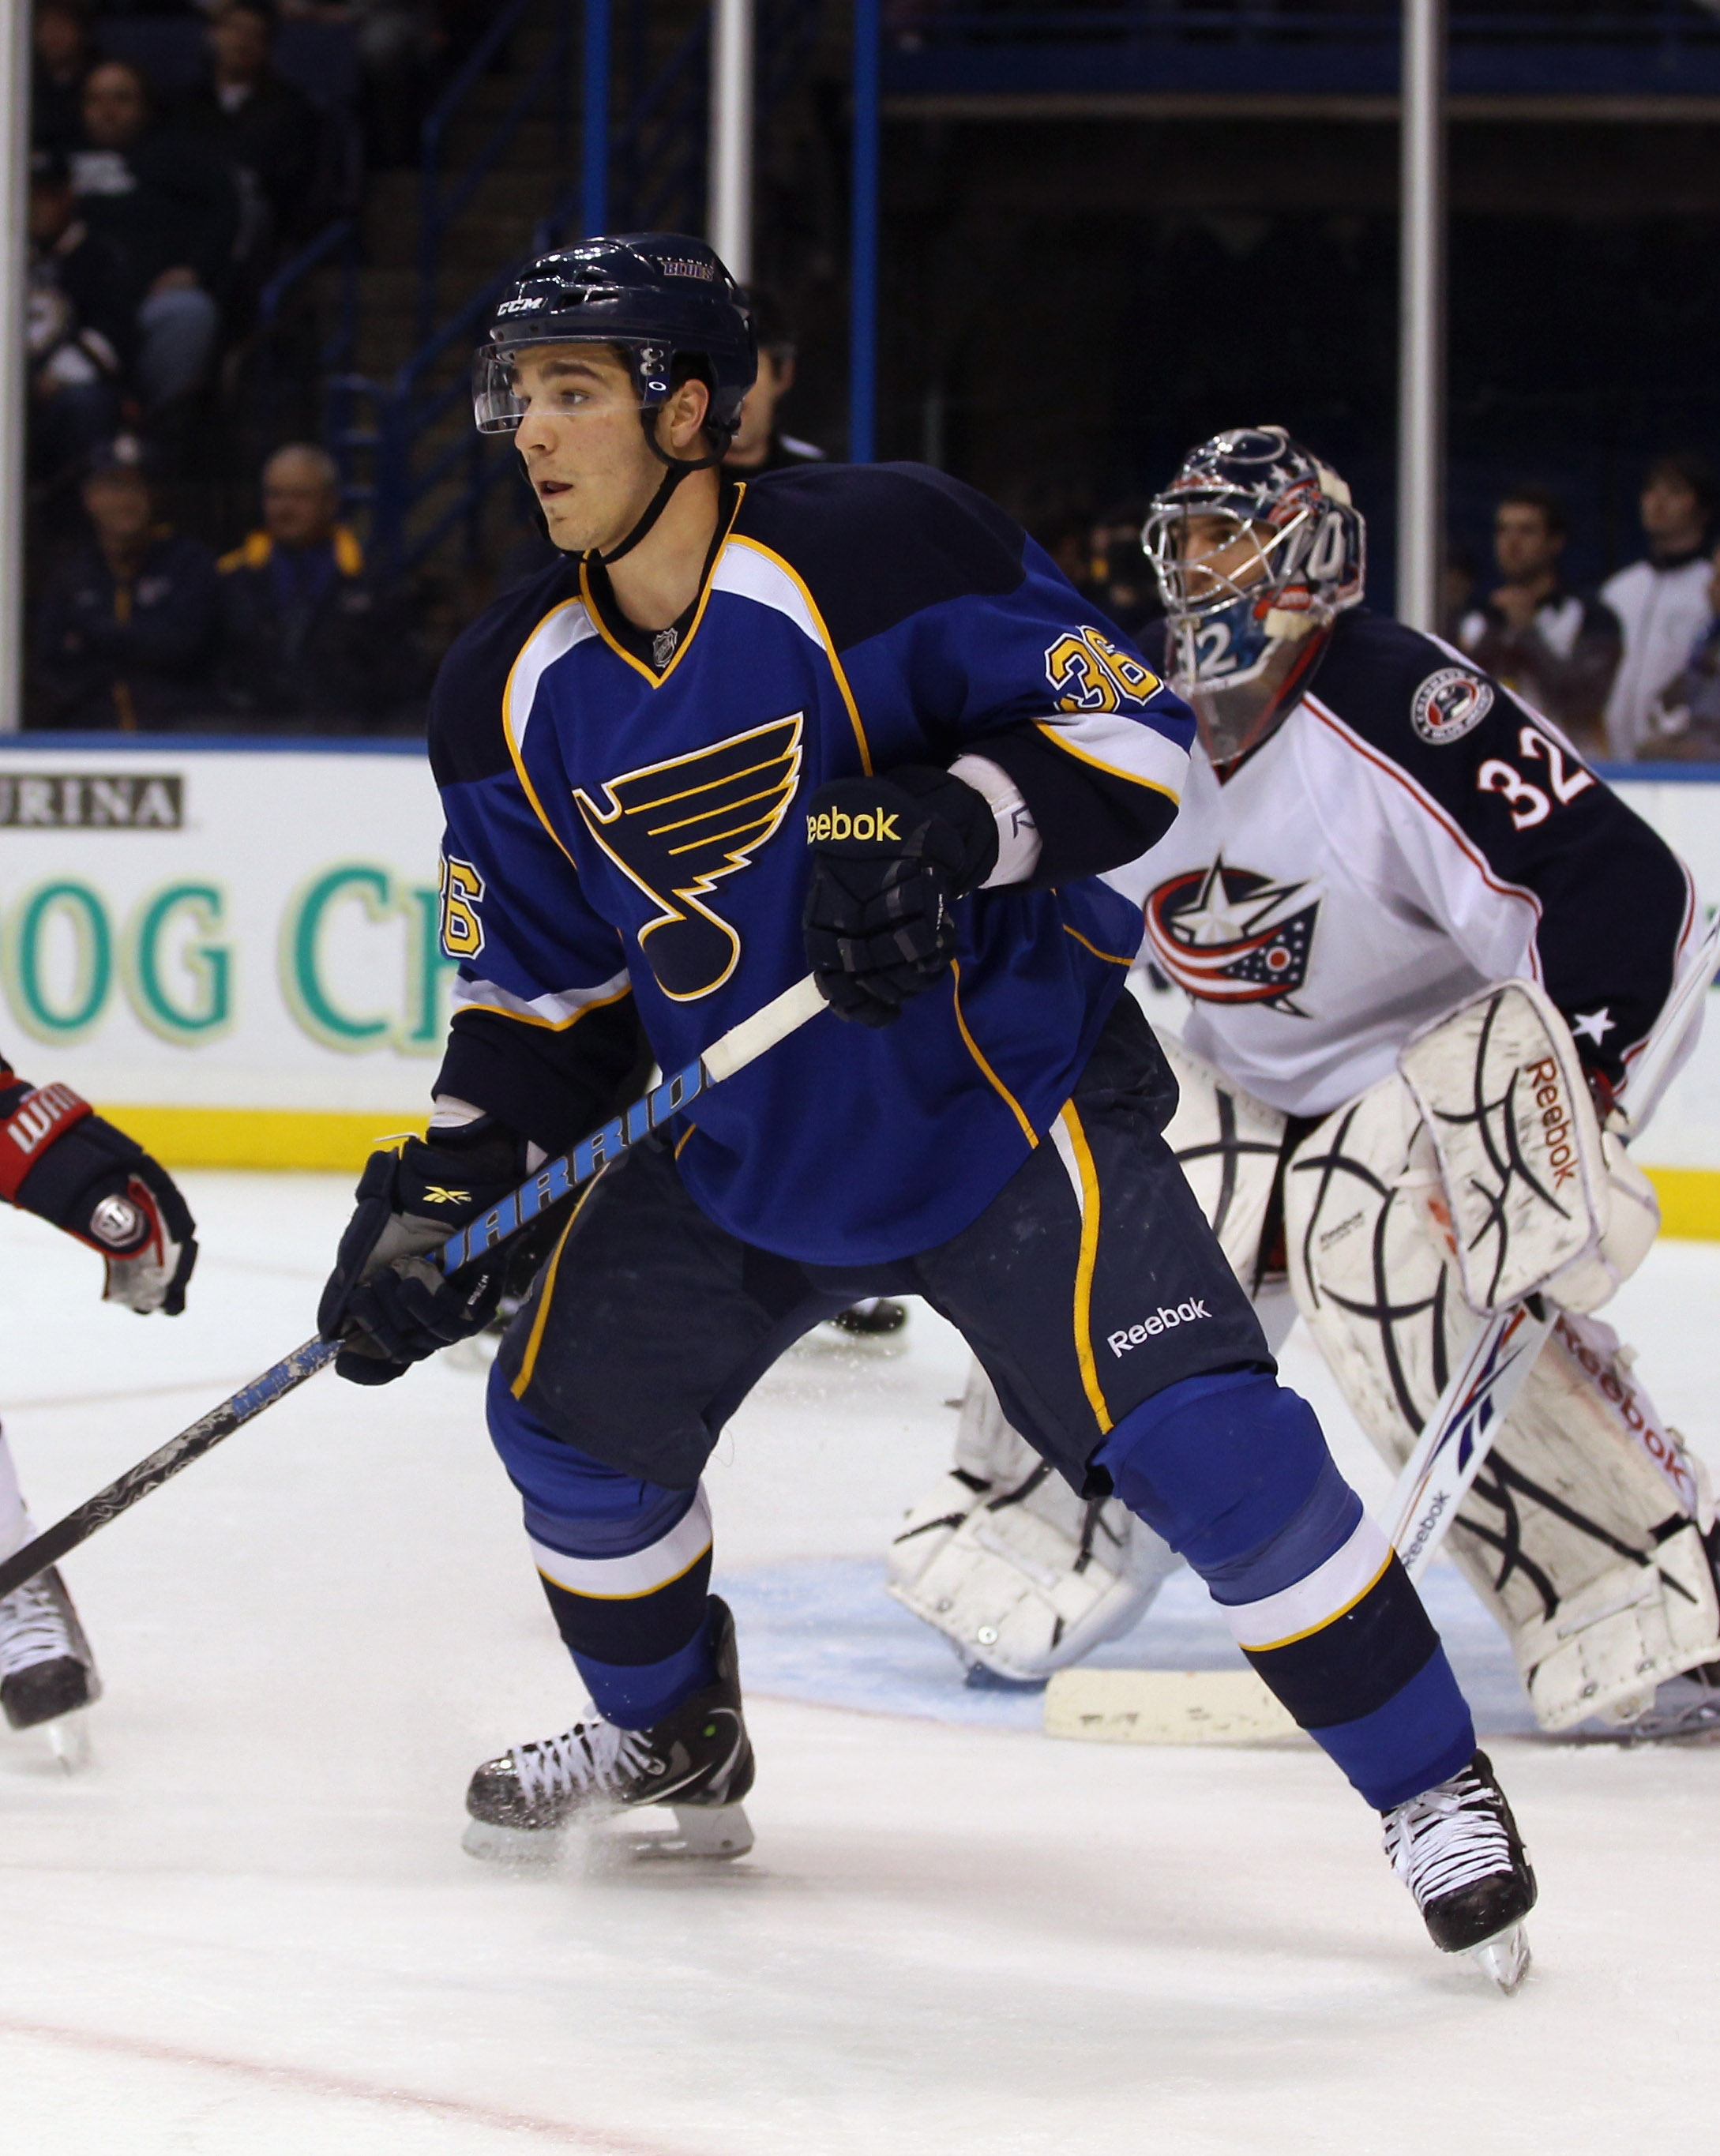 David Perron of the St. Louis Blues skates against the Columbus Blue  News Photo - Getty Images